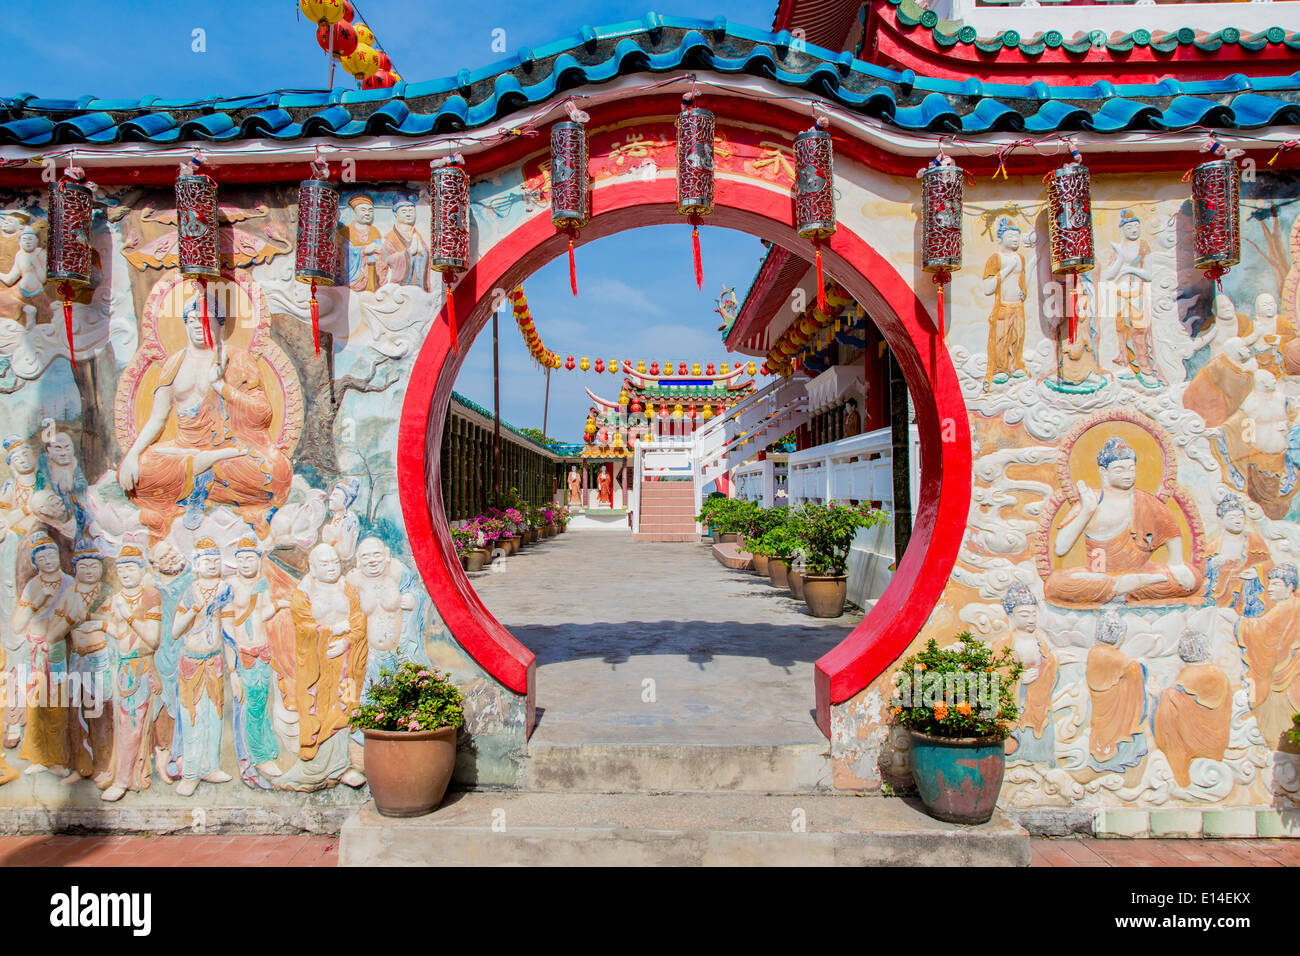 Entrance to Temple of Sukhavati, George Town, Penang, Malaysia Stock Photo